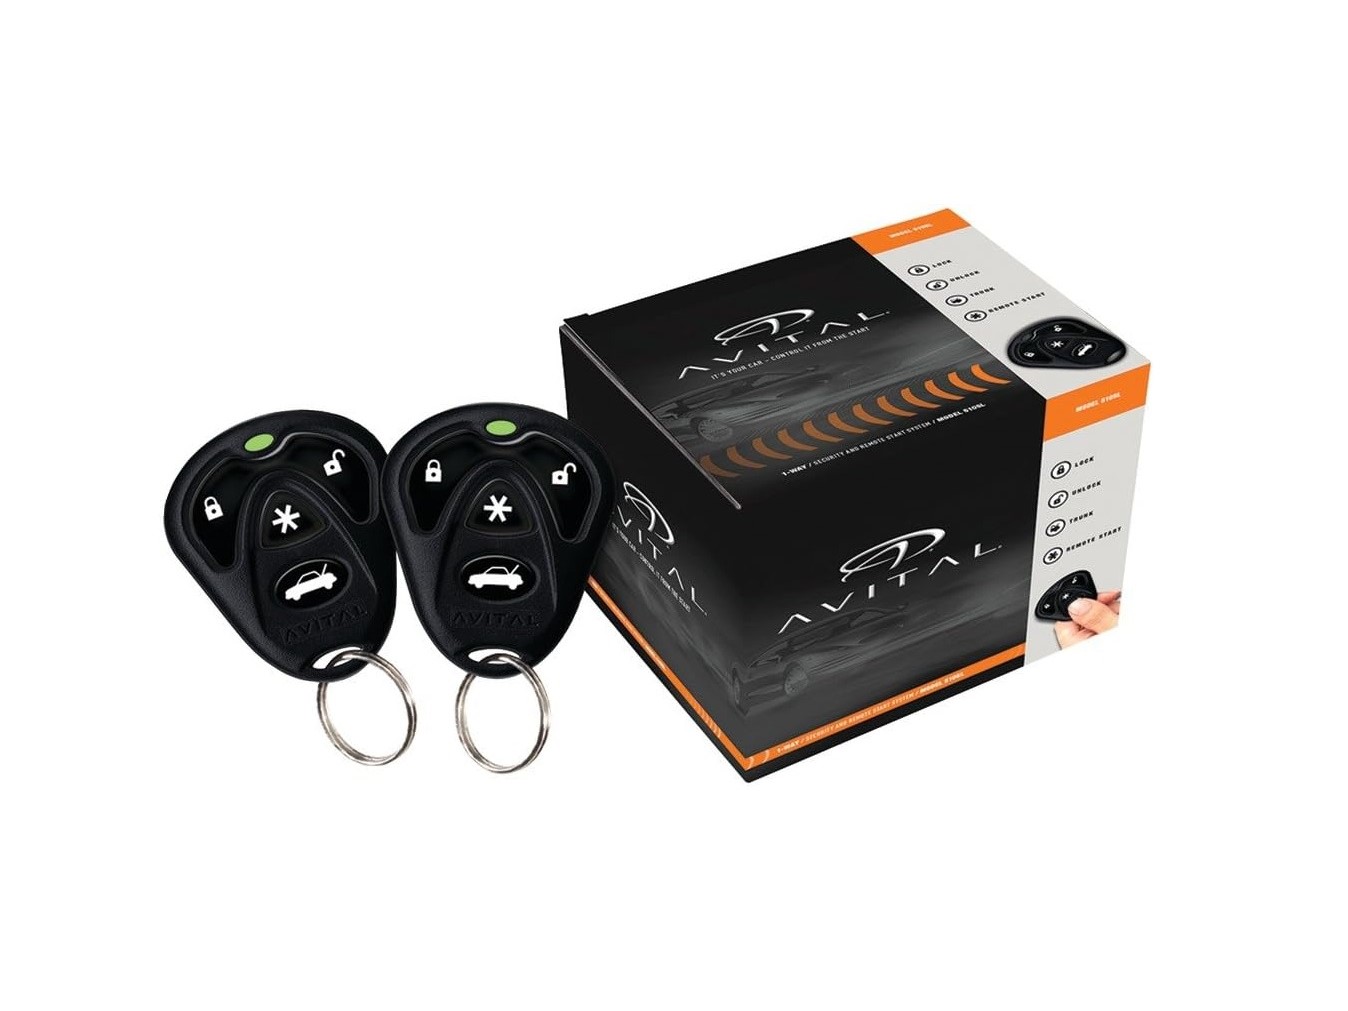 Avital 5105L remote starter kit with packaging